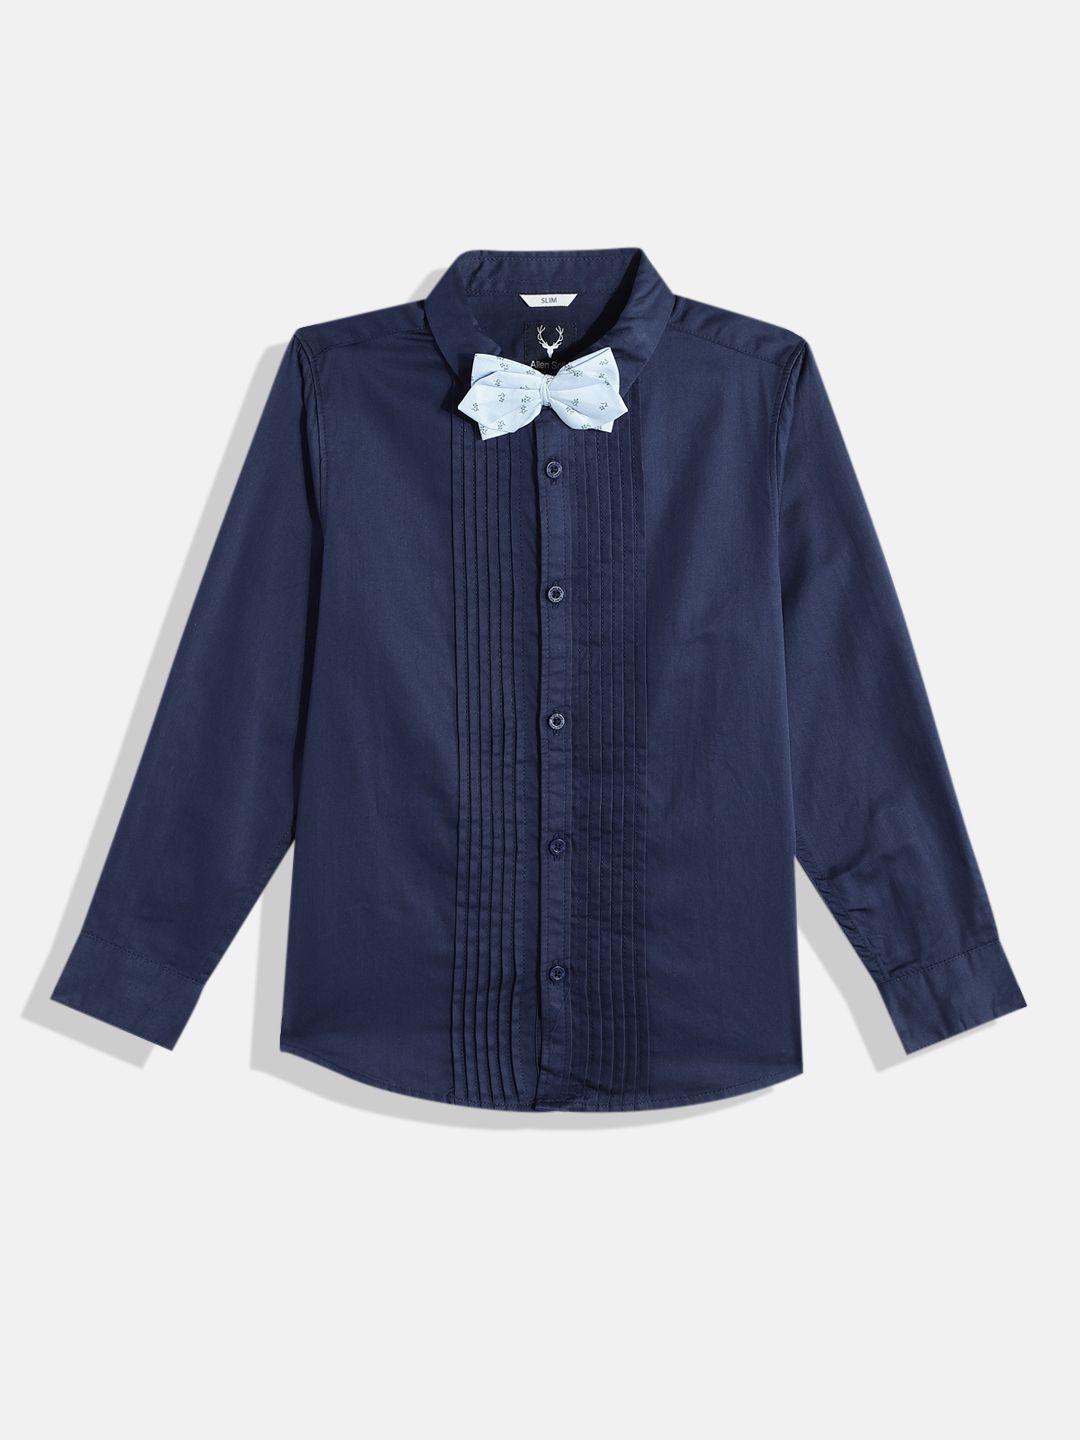 allen solly junior boys slim fit pin tucked pure cotton casual shirt with bow tie